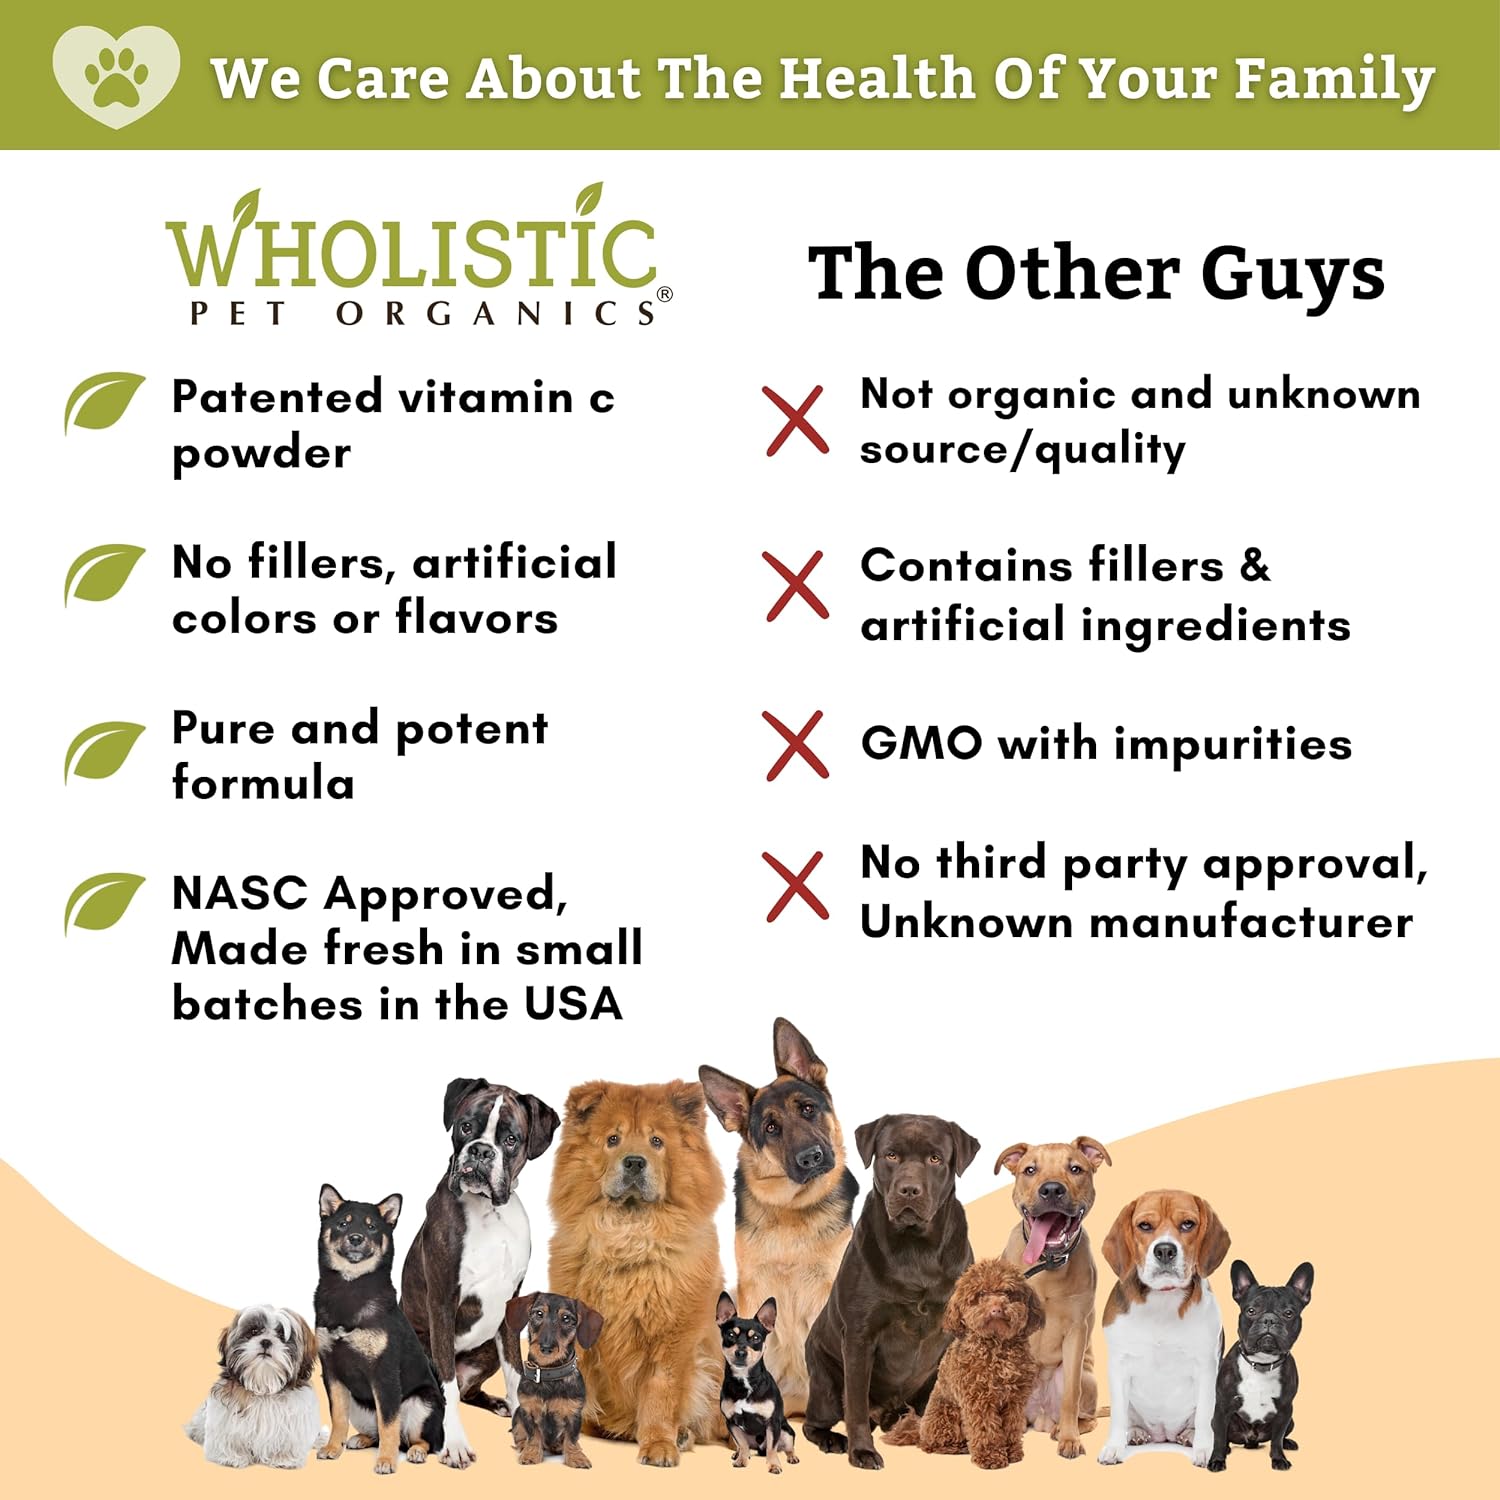 Wholistic Pet Organics Allergy Immune Boost: Vitamin C for Dogs - 2 Oz - Dog Itch Relief - Immune Support Supplement for Dog Allergy Relief Medication - Ester C Supplement for Dogs Skin and Coat : Pet Probiotic Nutritional Supplements : Pet Supplies